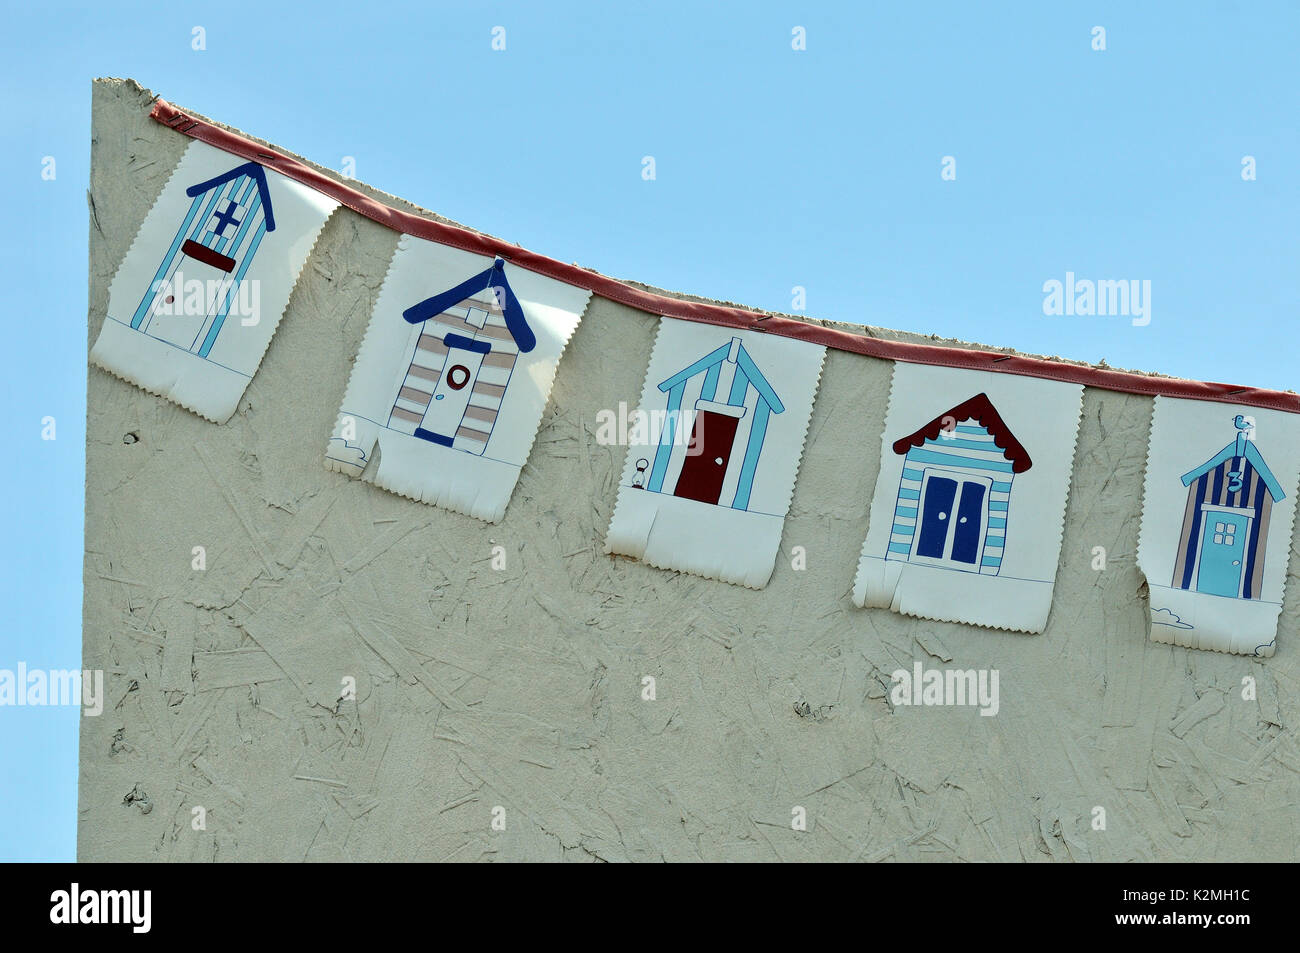 some flags or bunting on the side of a beach hut showing beach huts and a coastal theme of the seaside seashore nautical coastline marine maritime Stock Photo